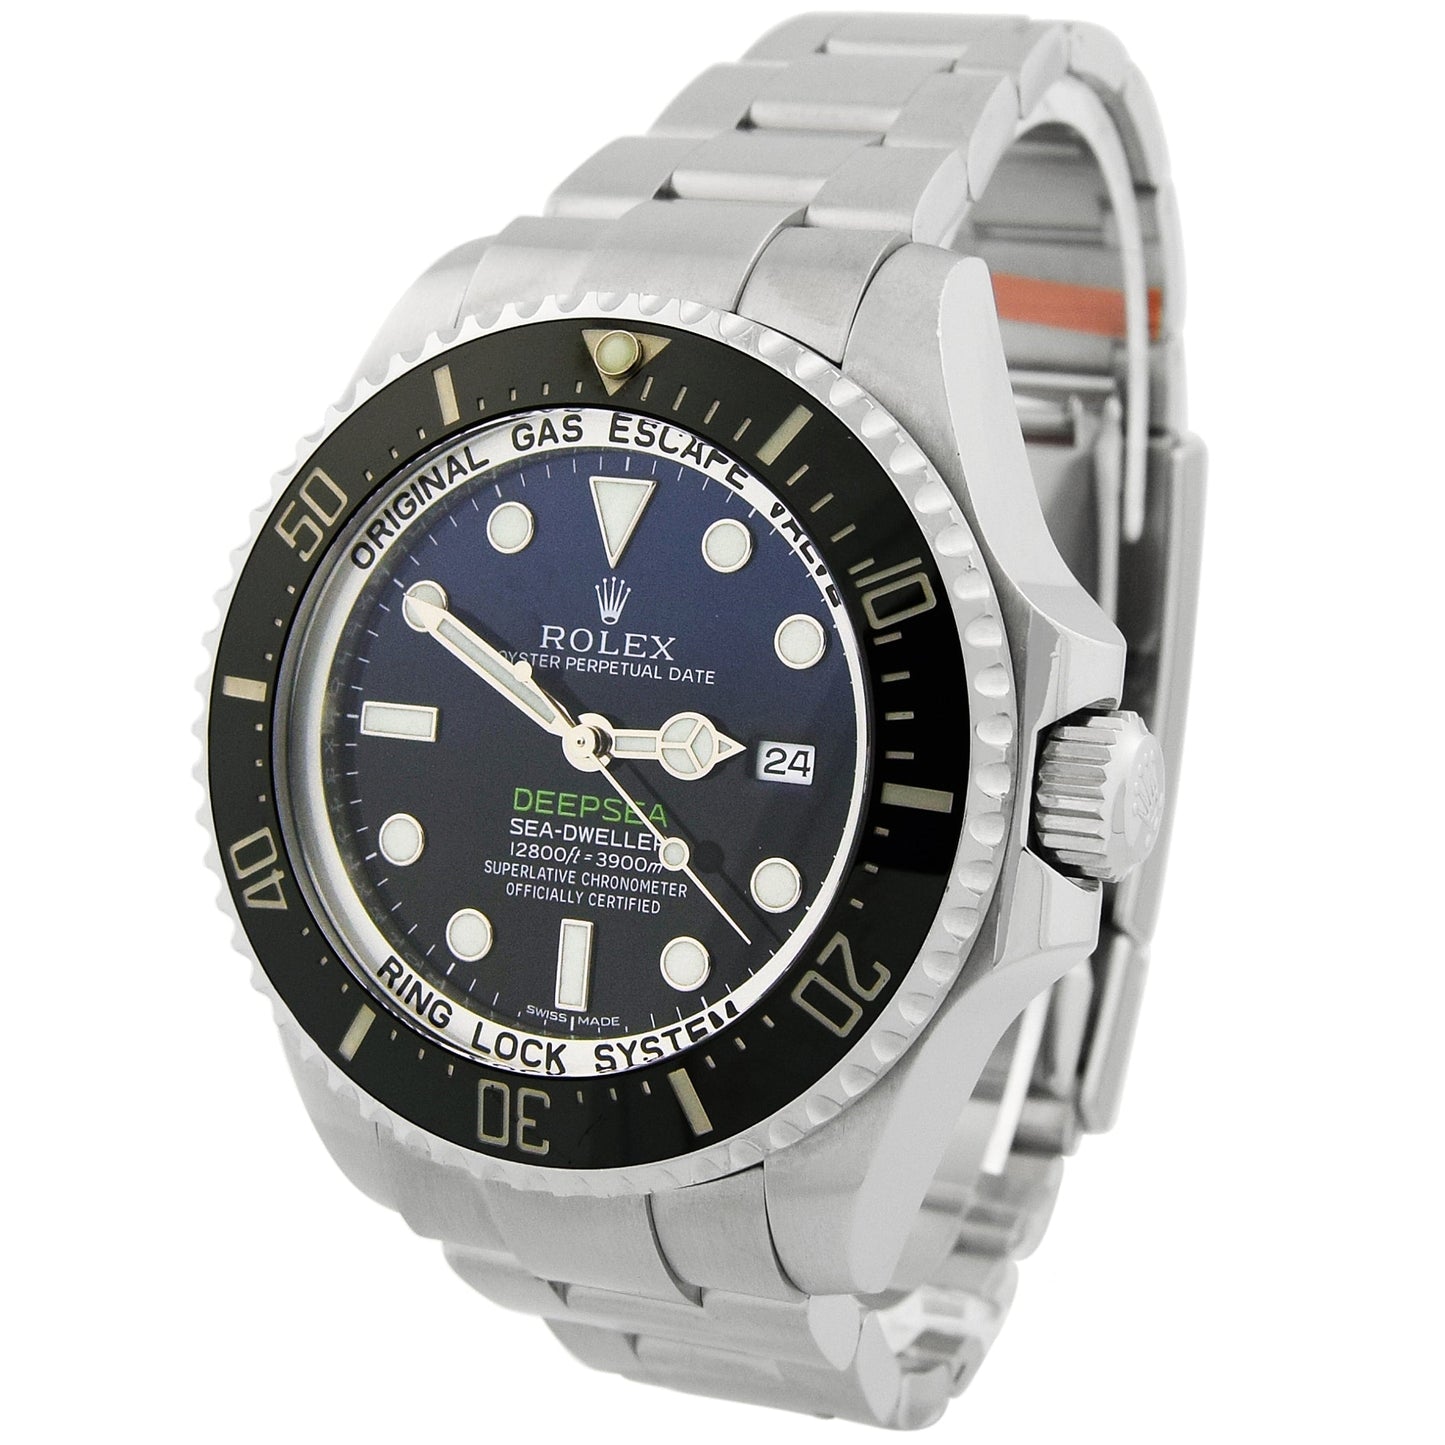 Rolex Sea Dweller Deepsea "James Cameron" Stainless Steel Dot Dial Watch Reference# 116660